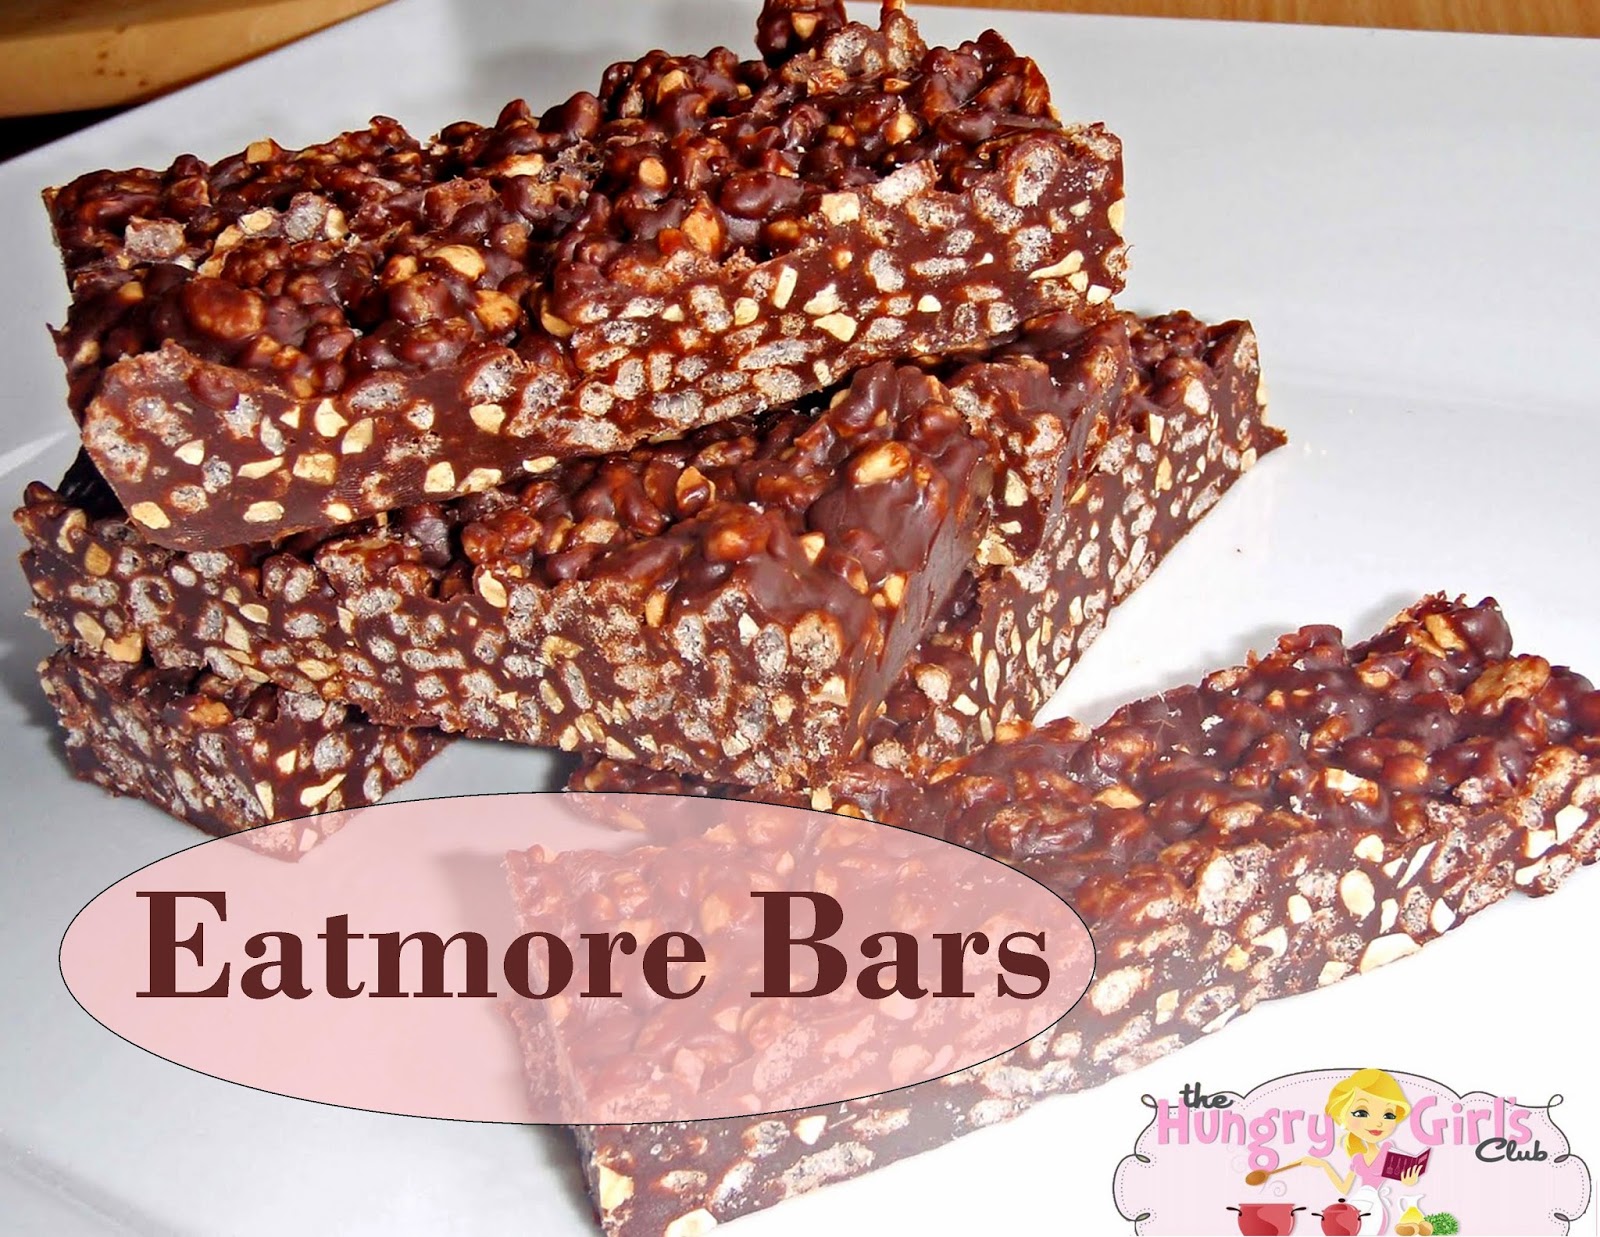 The Hungry Girl's Club: Eatmore Bars